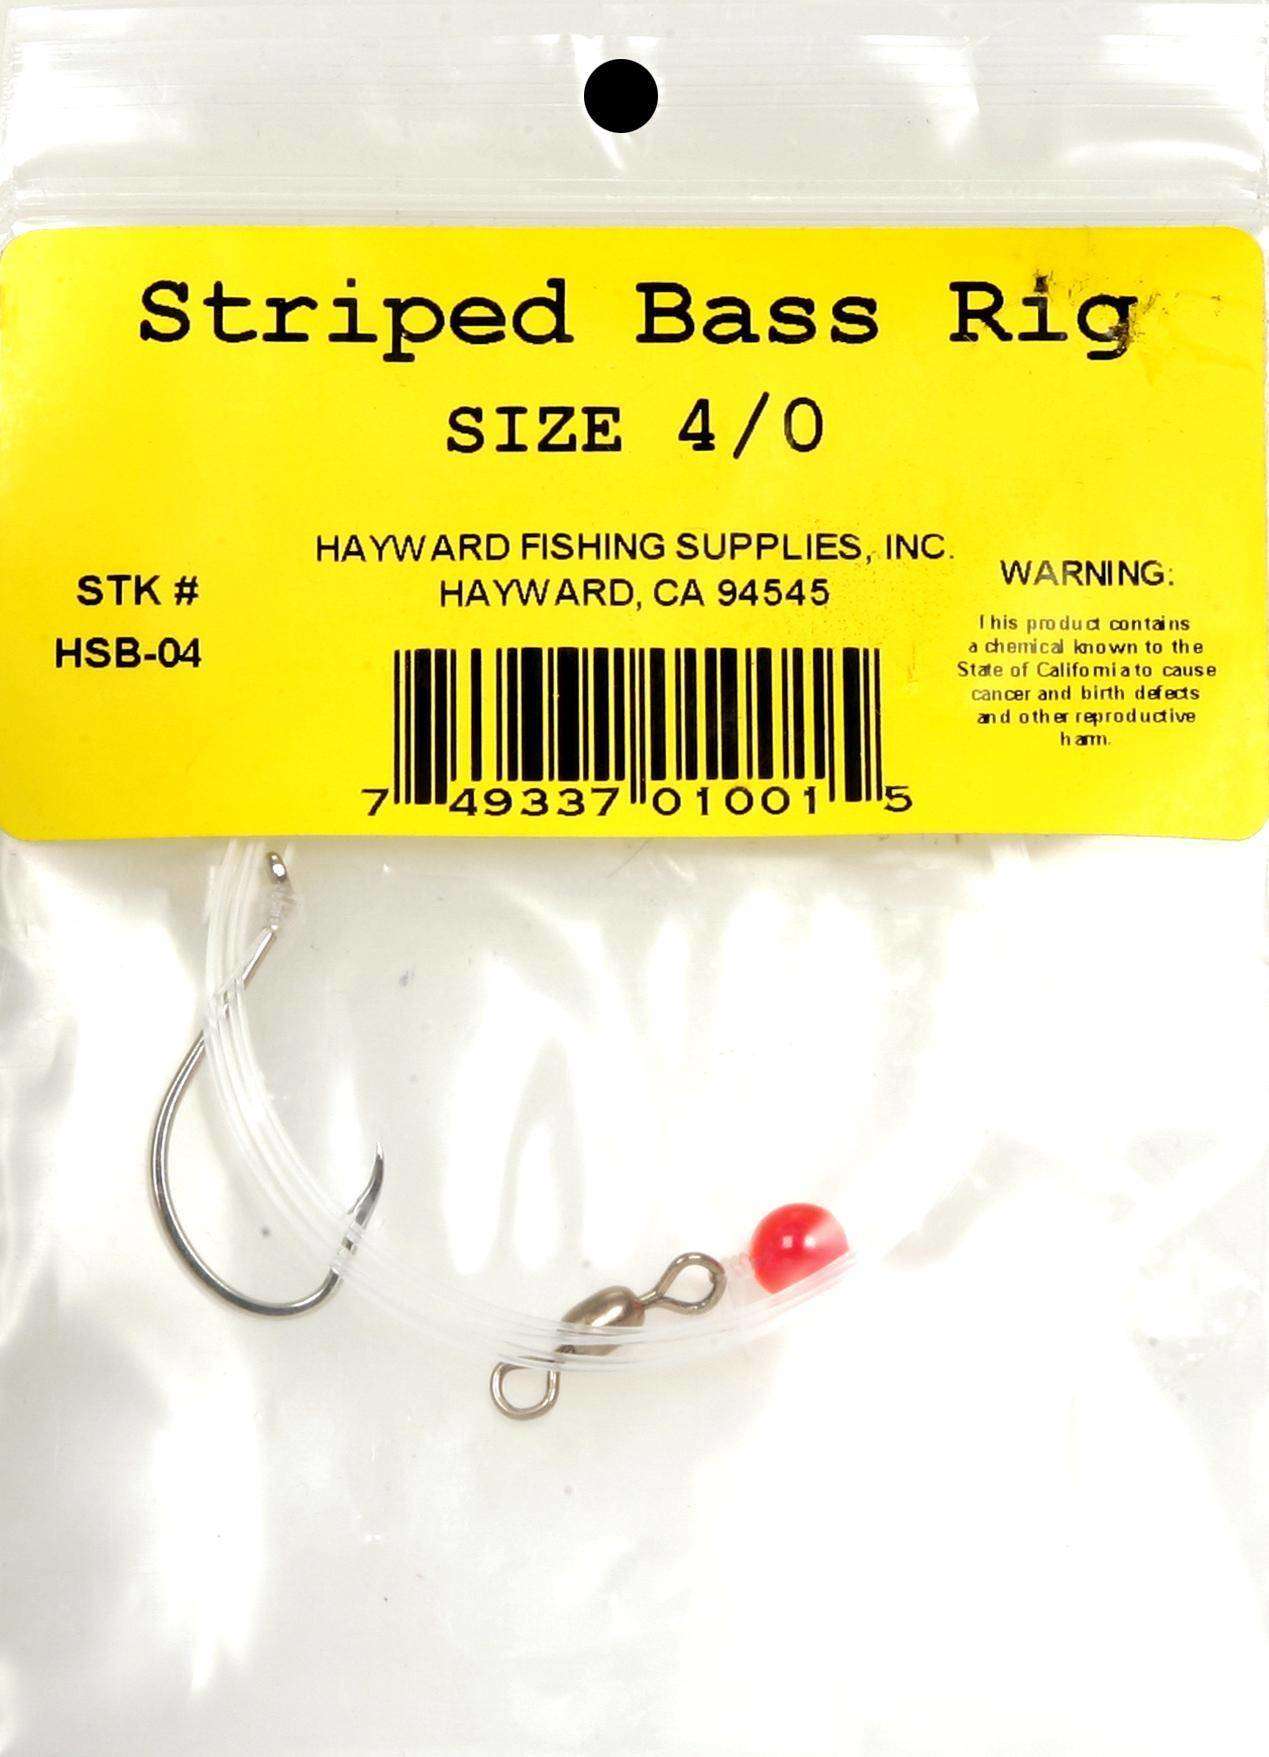 Hayward Fishing Supplies Striped Bass Rig 1 Per Pack Size 5/0